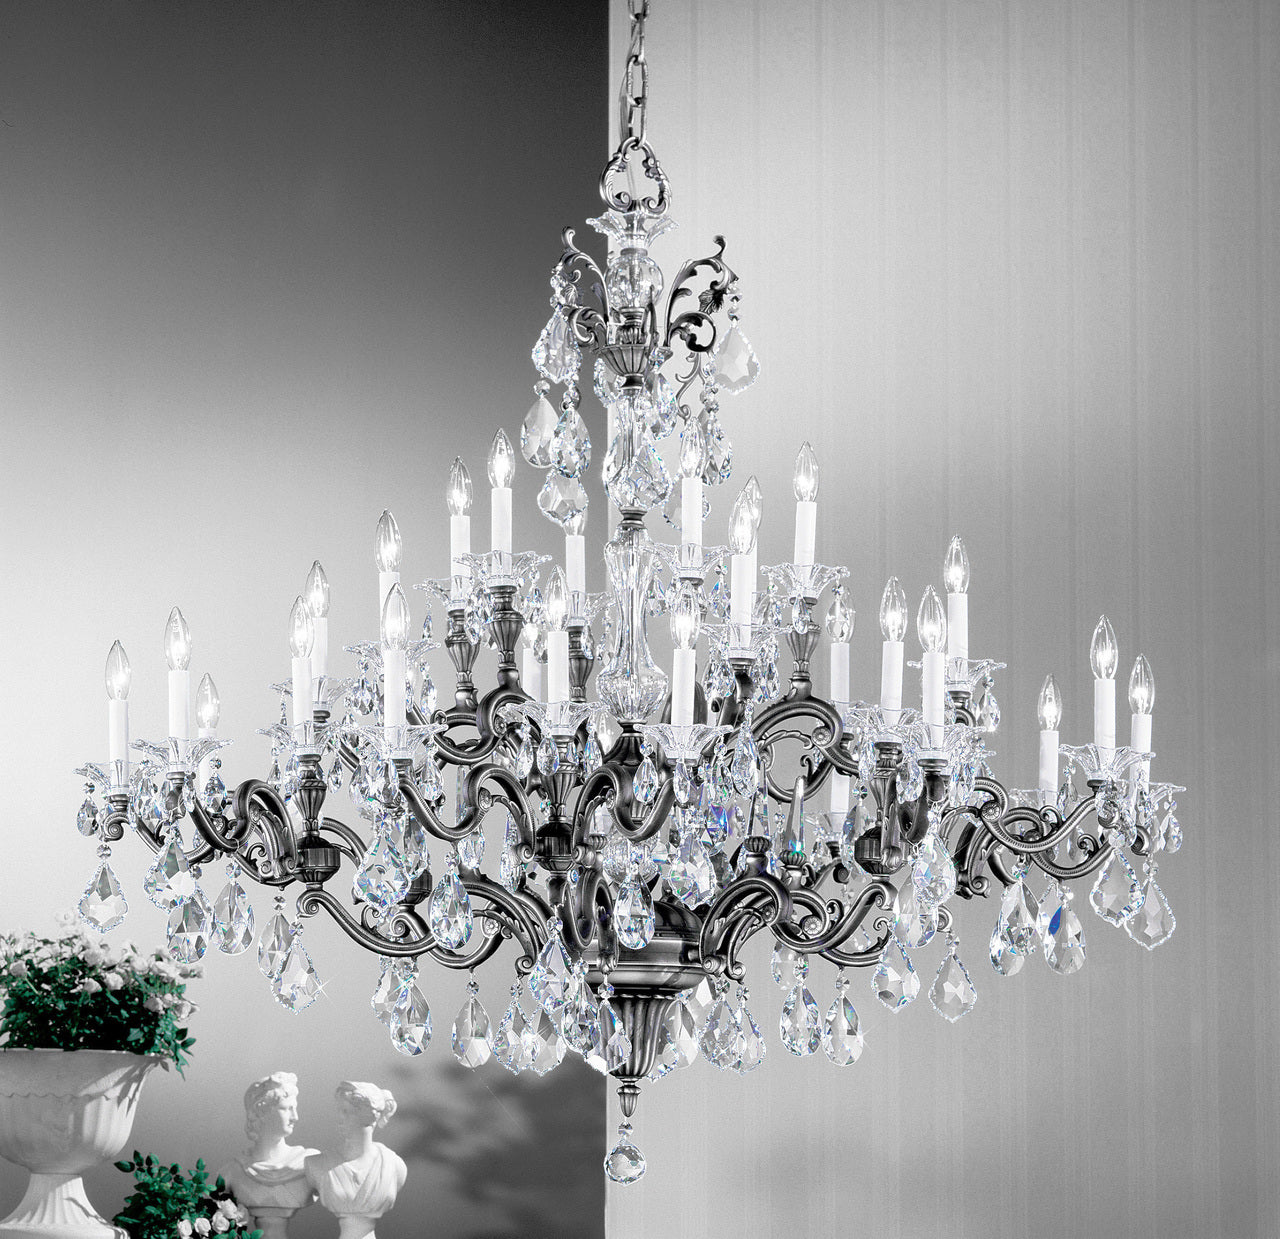 Classic Lighting 57130 MS CBK Via Firenze Crystal Chandelier in Millennium Silver (Imported from Spain)